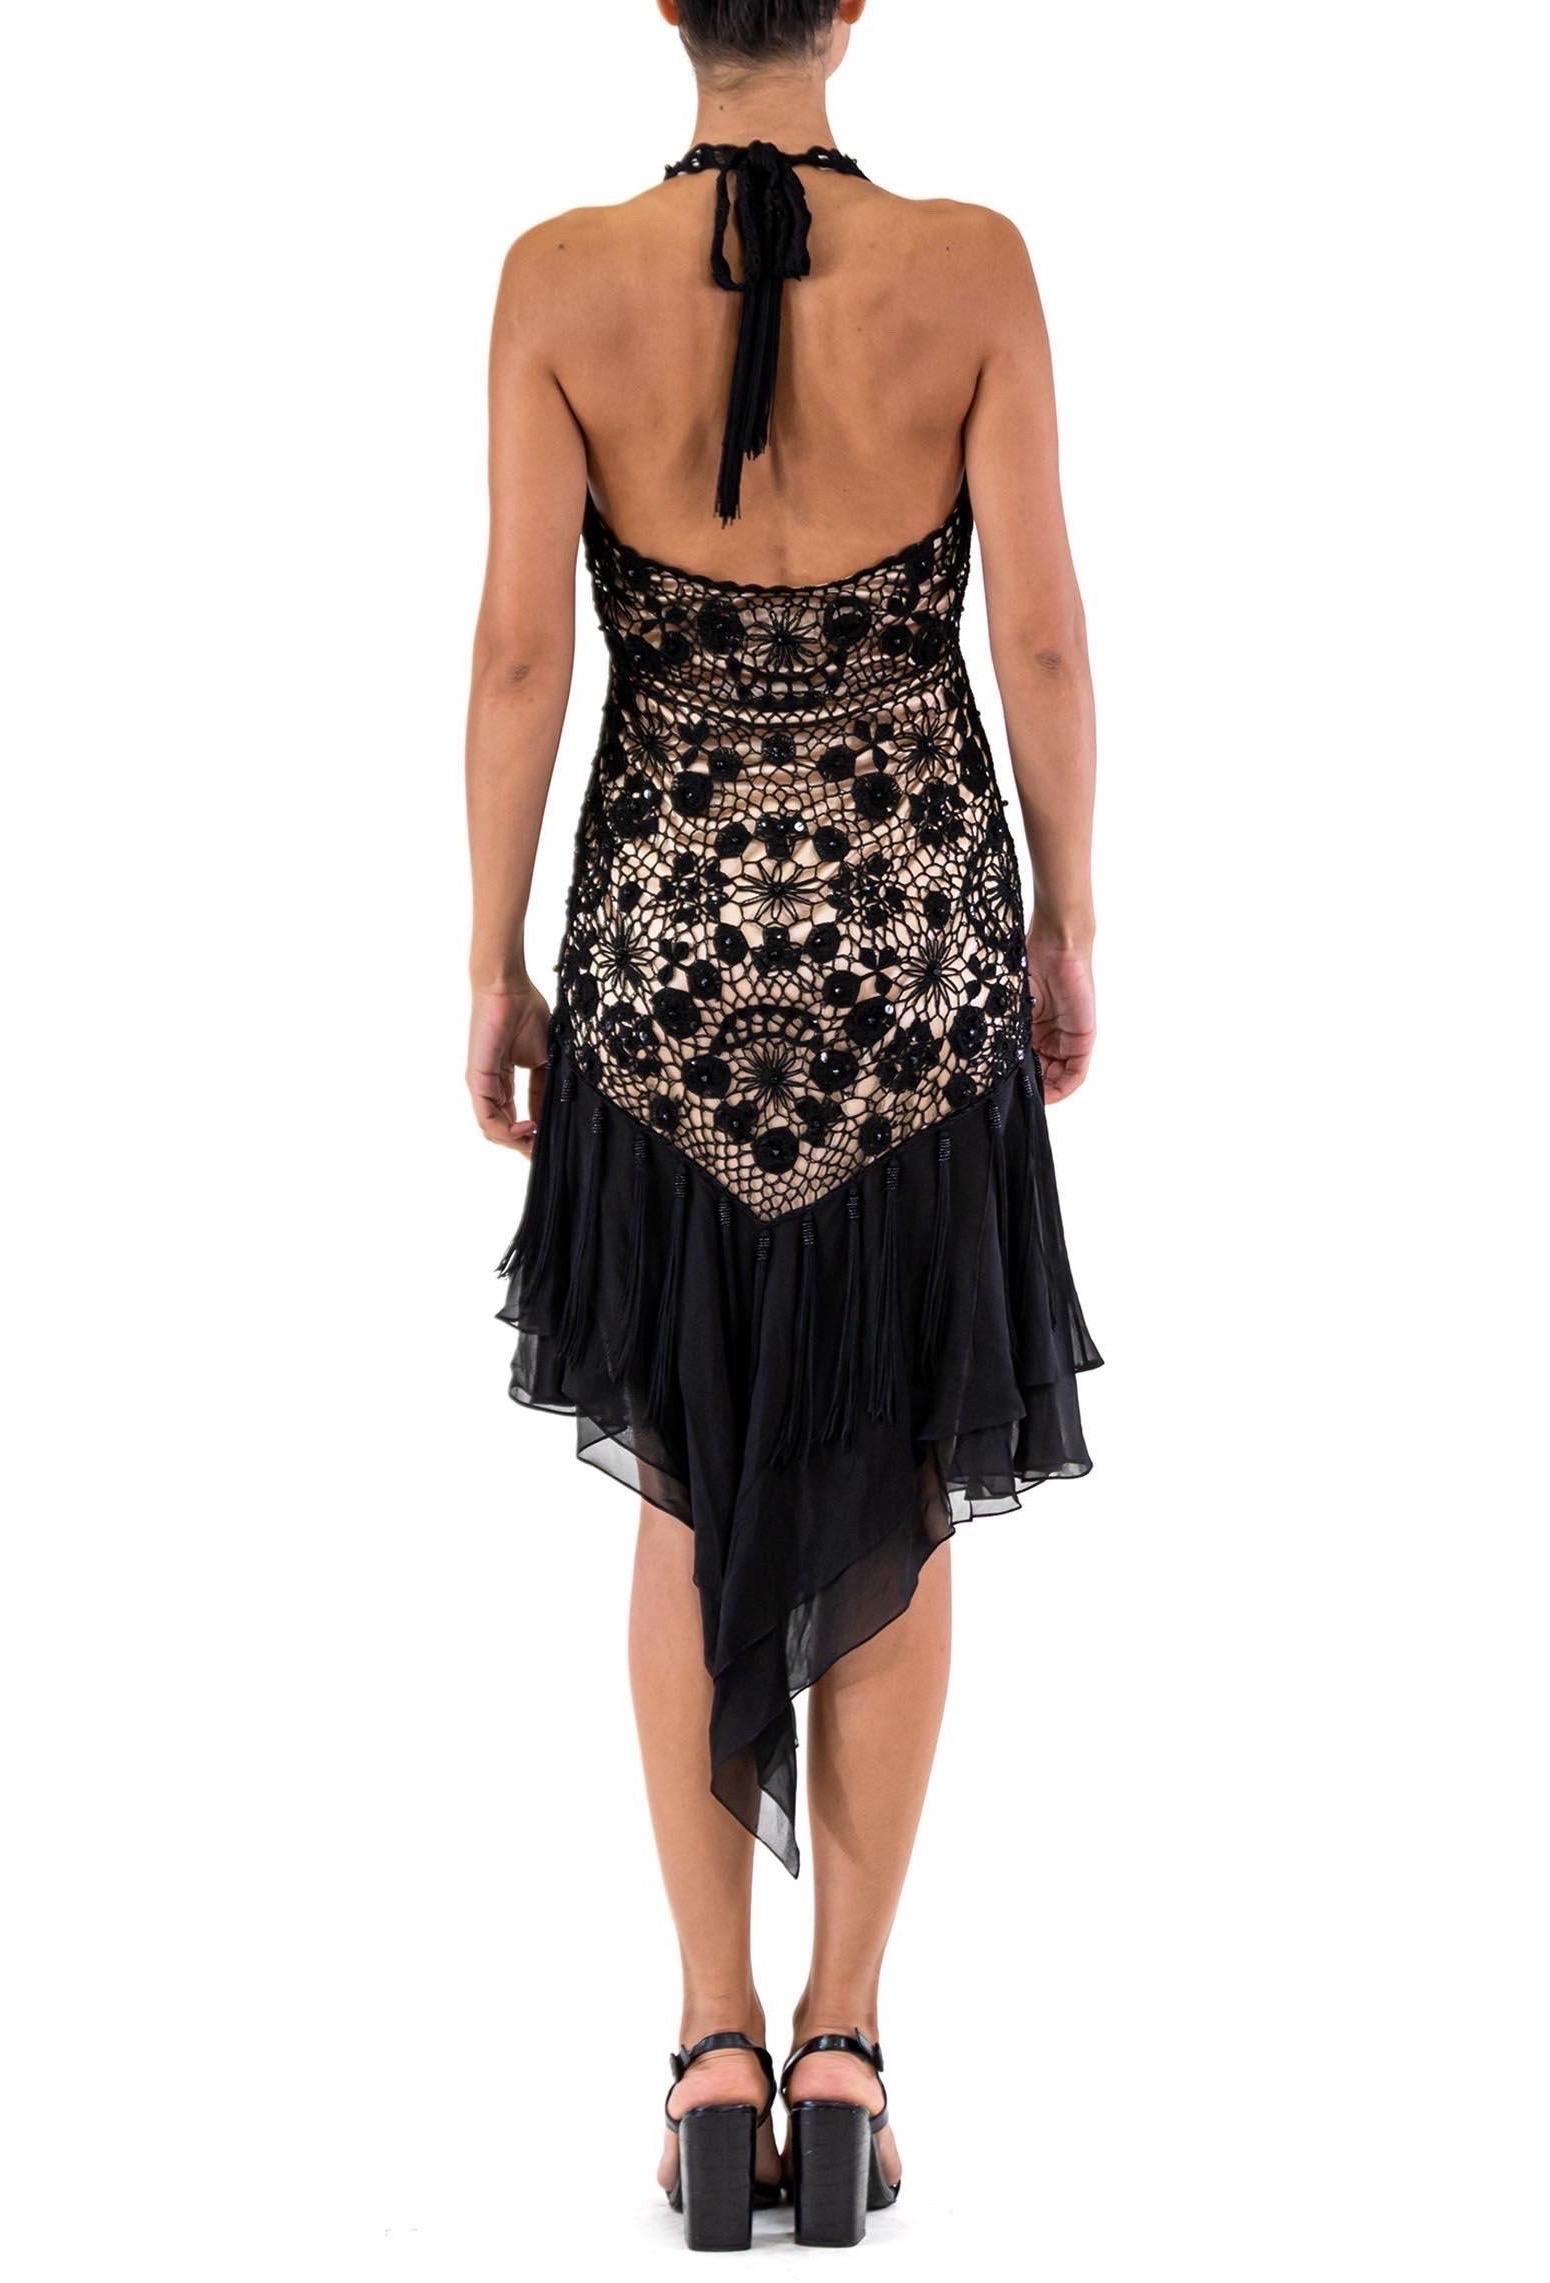 Black Rayon Crochet & Chiffon Cocktail Dress With Beaded Tassels For Sale 2